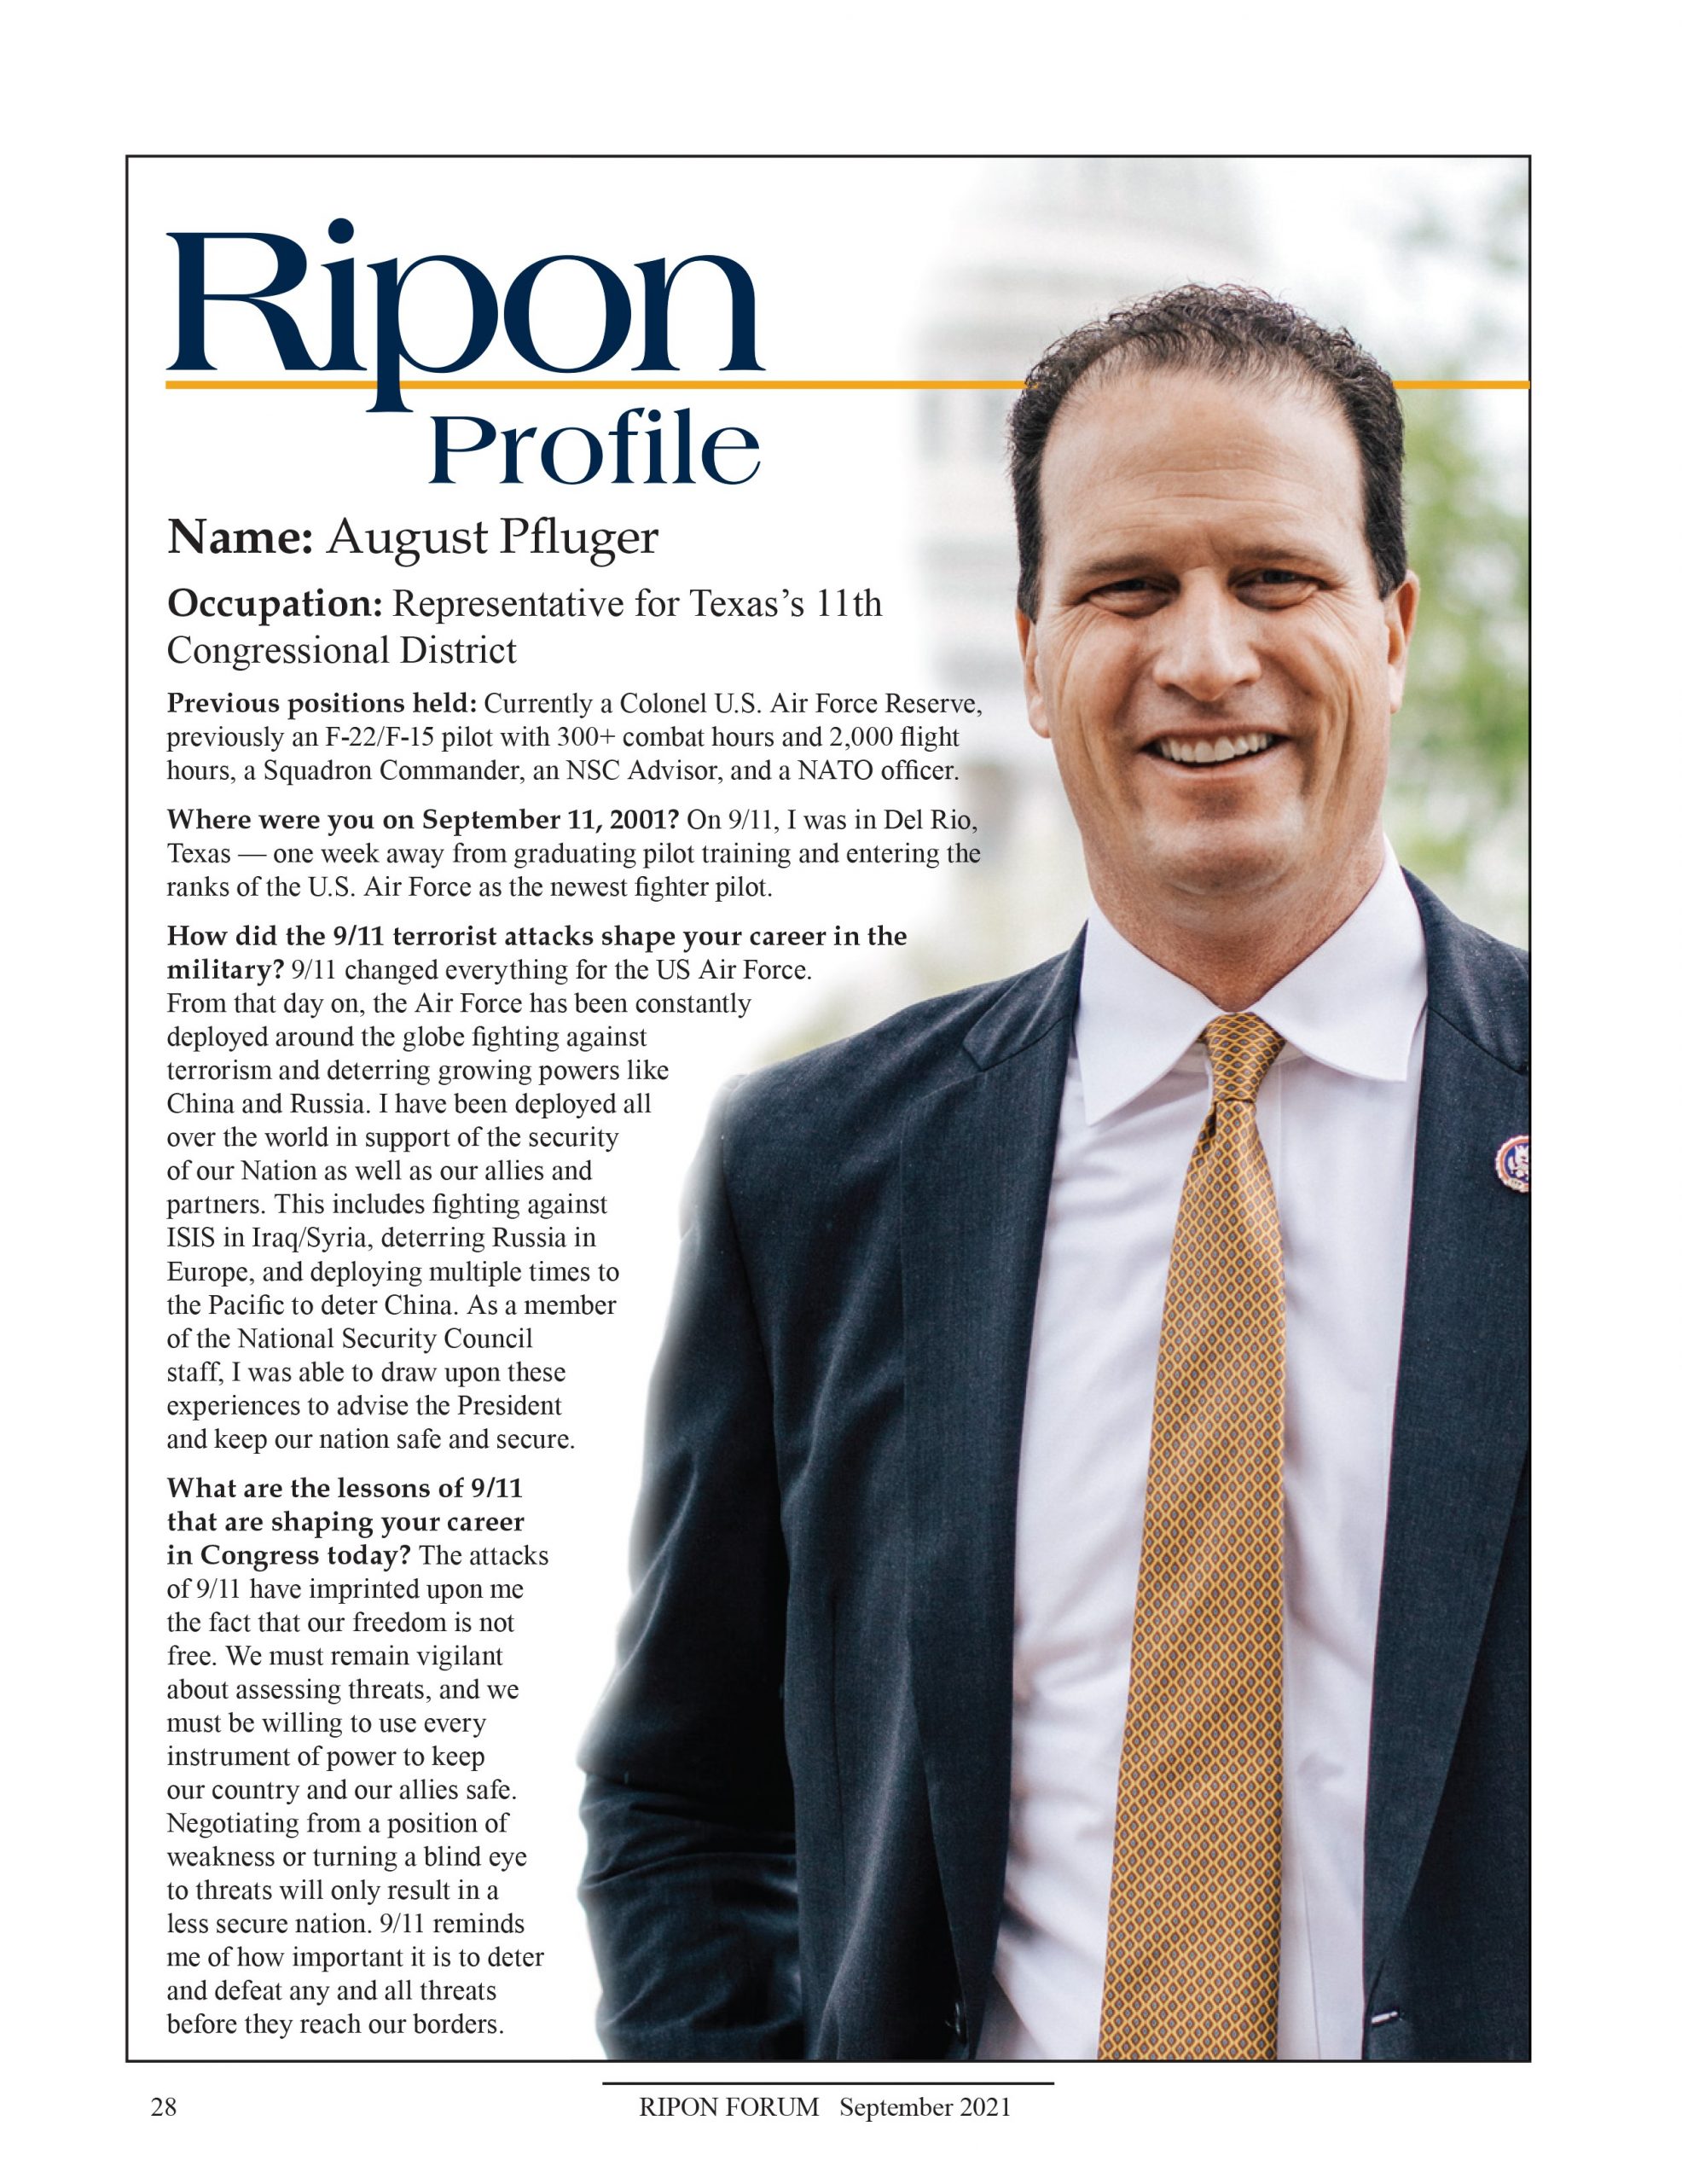 Ripon Profile of August Pfluger - The Ripon Society : The Ripon Society